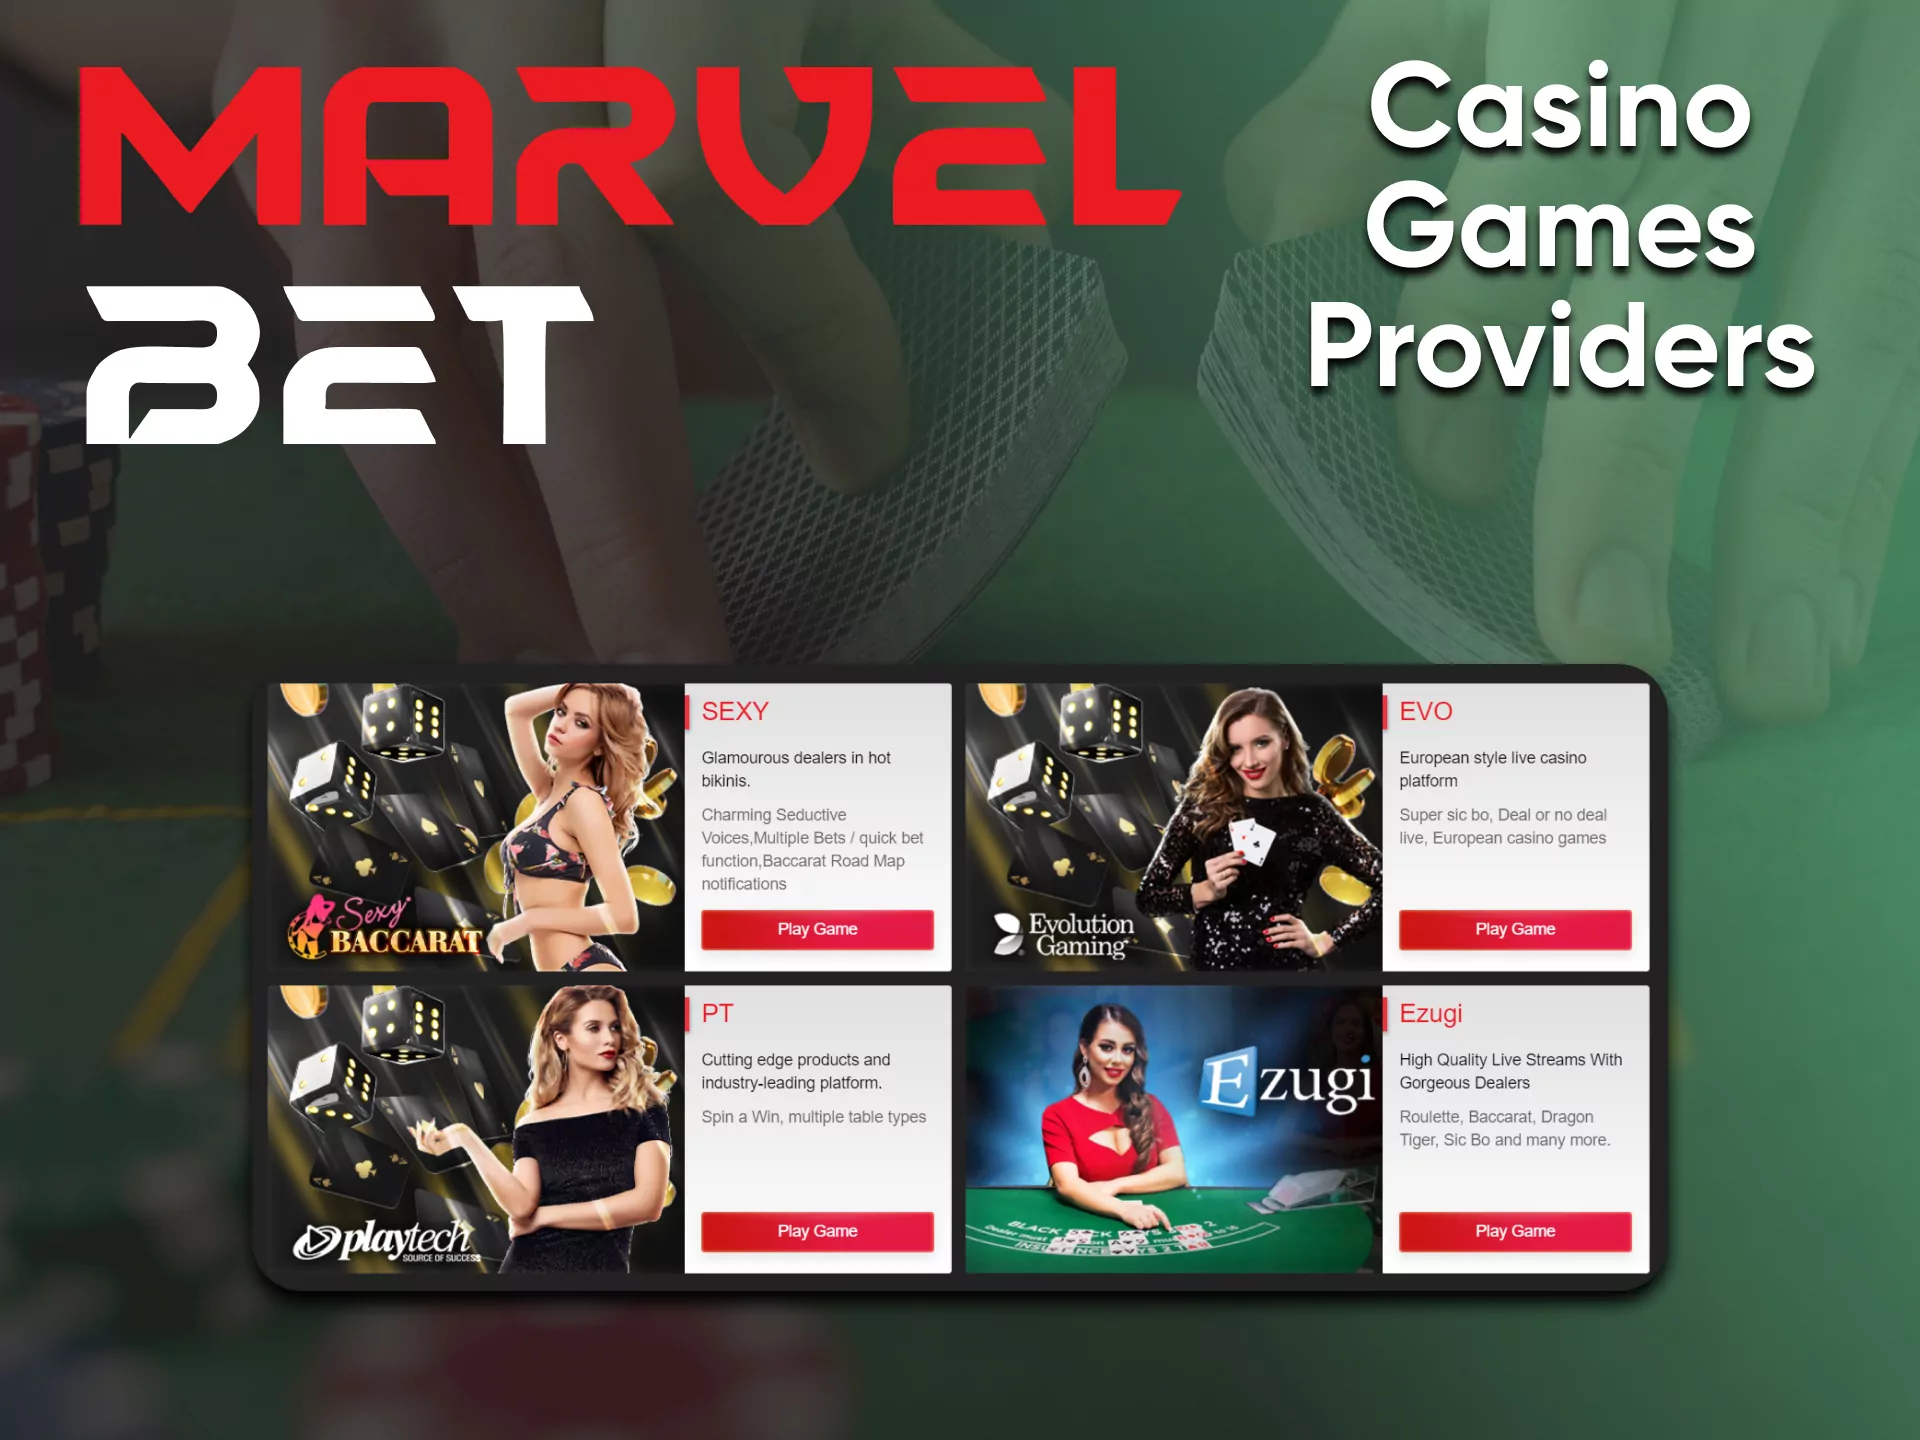 At the Marvelbet casino, games are only from trusted sources.